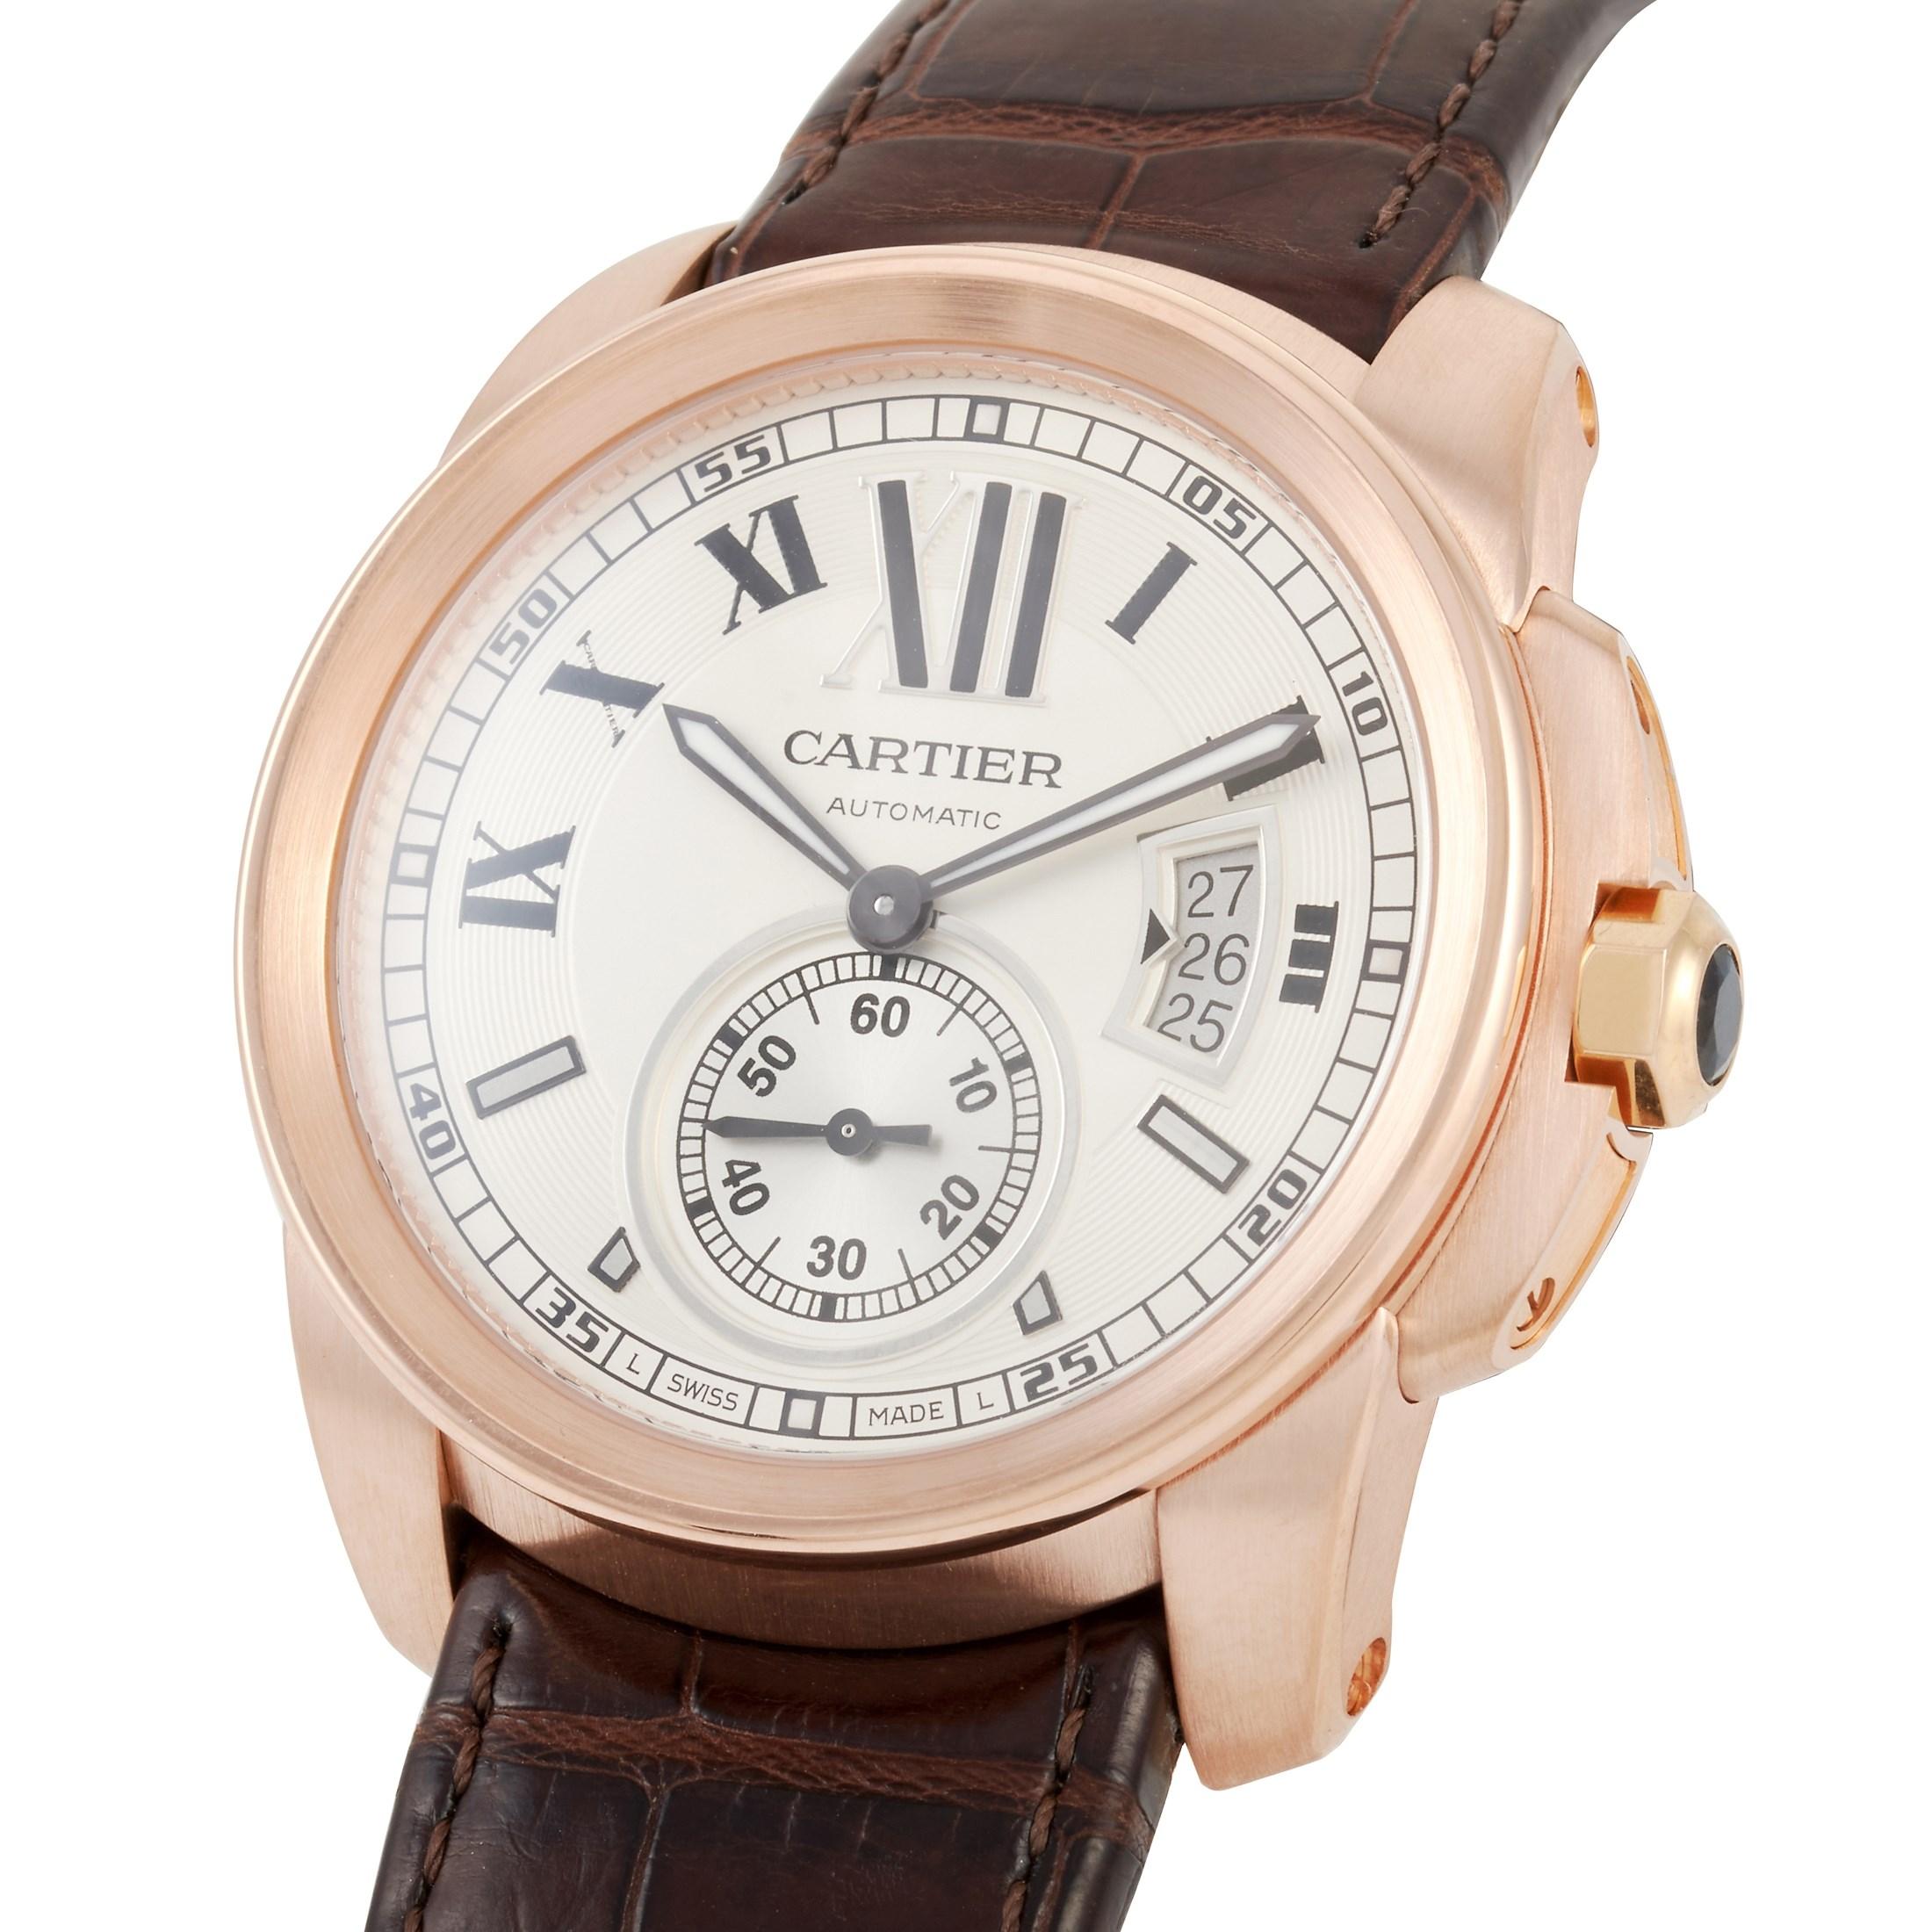 This Calibre De Cartier Automatic 18K Rose Gold Watch, reference number W7100009, features an 18K Rose Gold case measuring 42 mm in diameter. It is presented on an attractive deep brown alligator leather bracelet with a tang clasp. The transparent